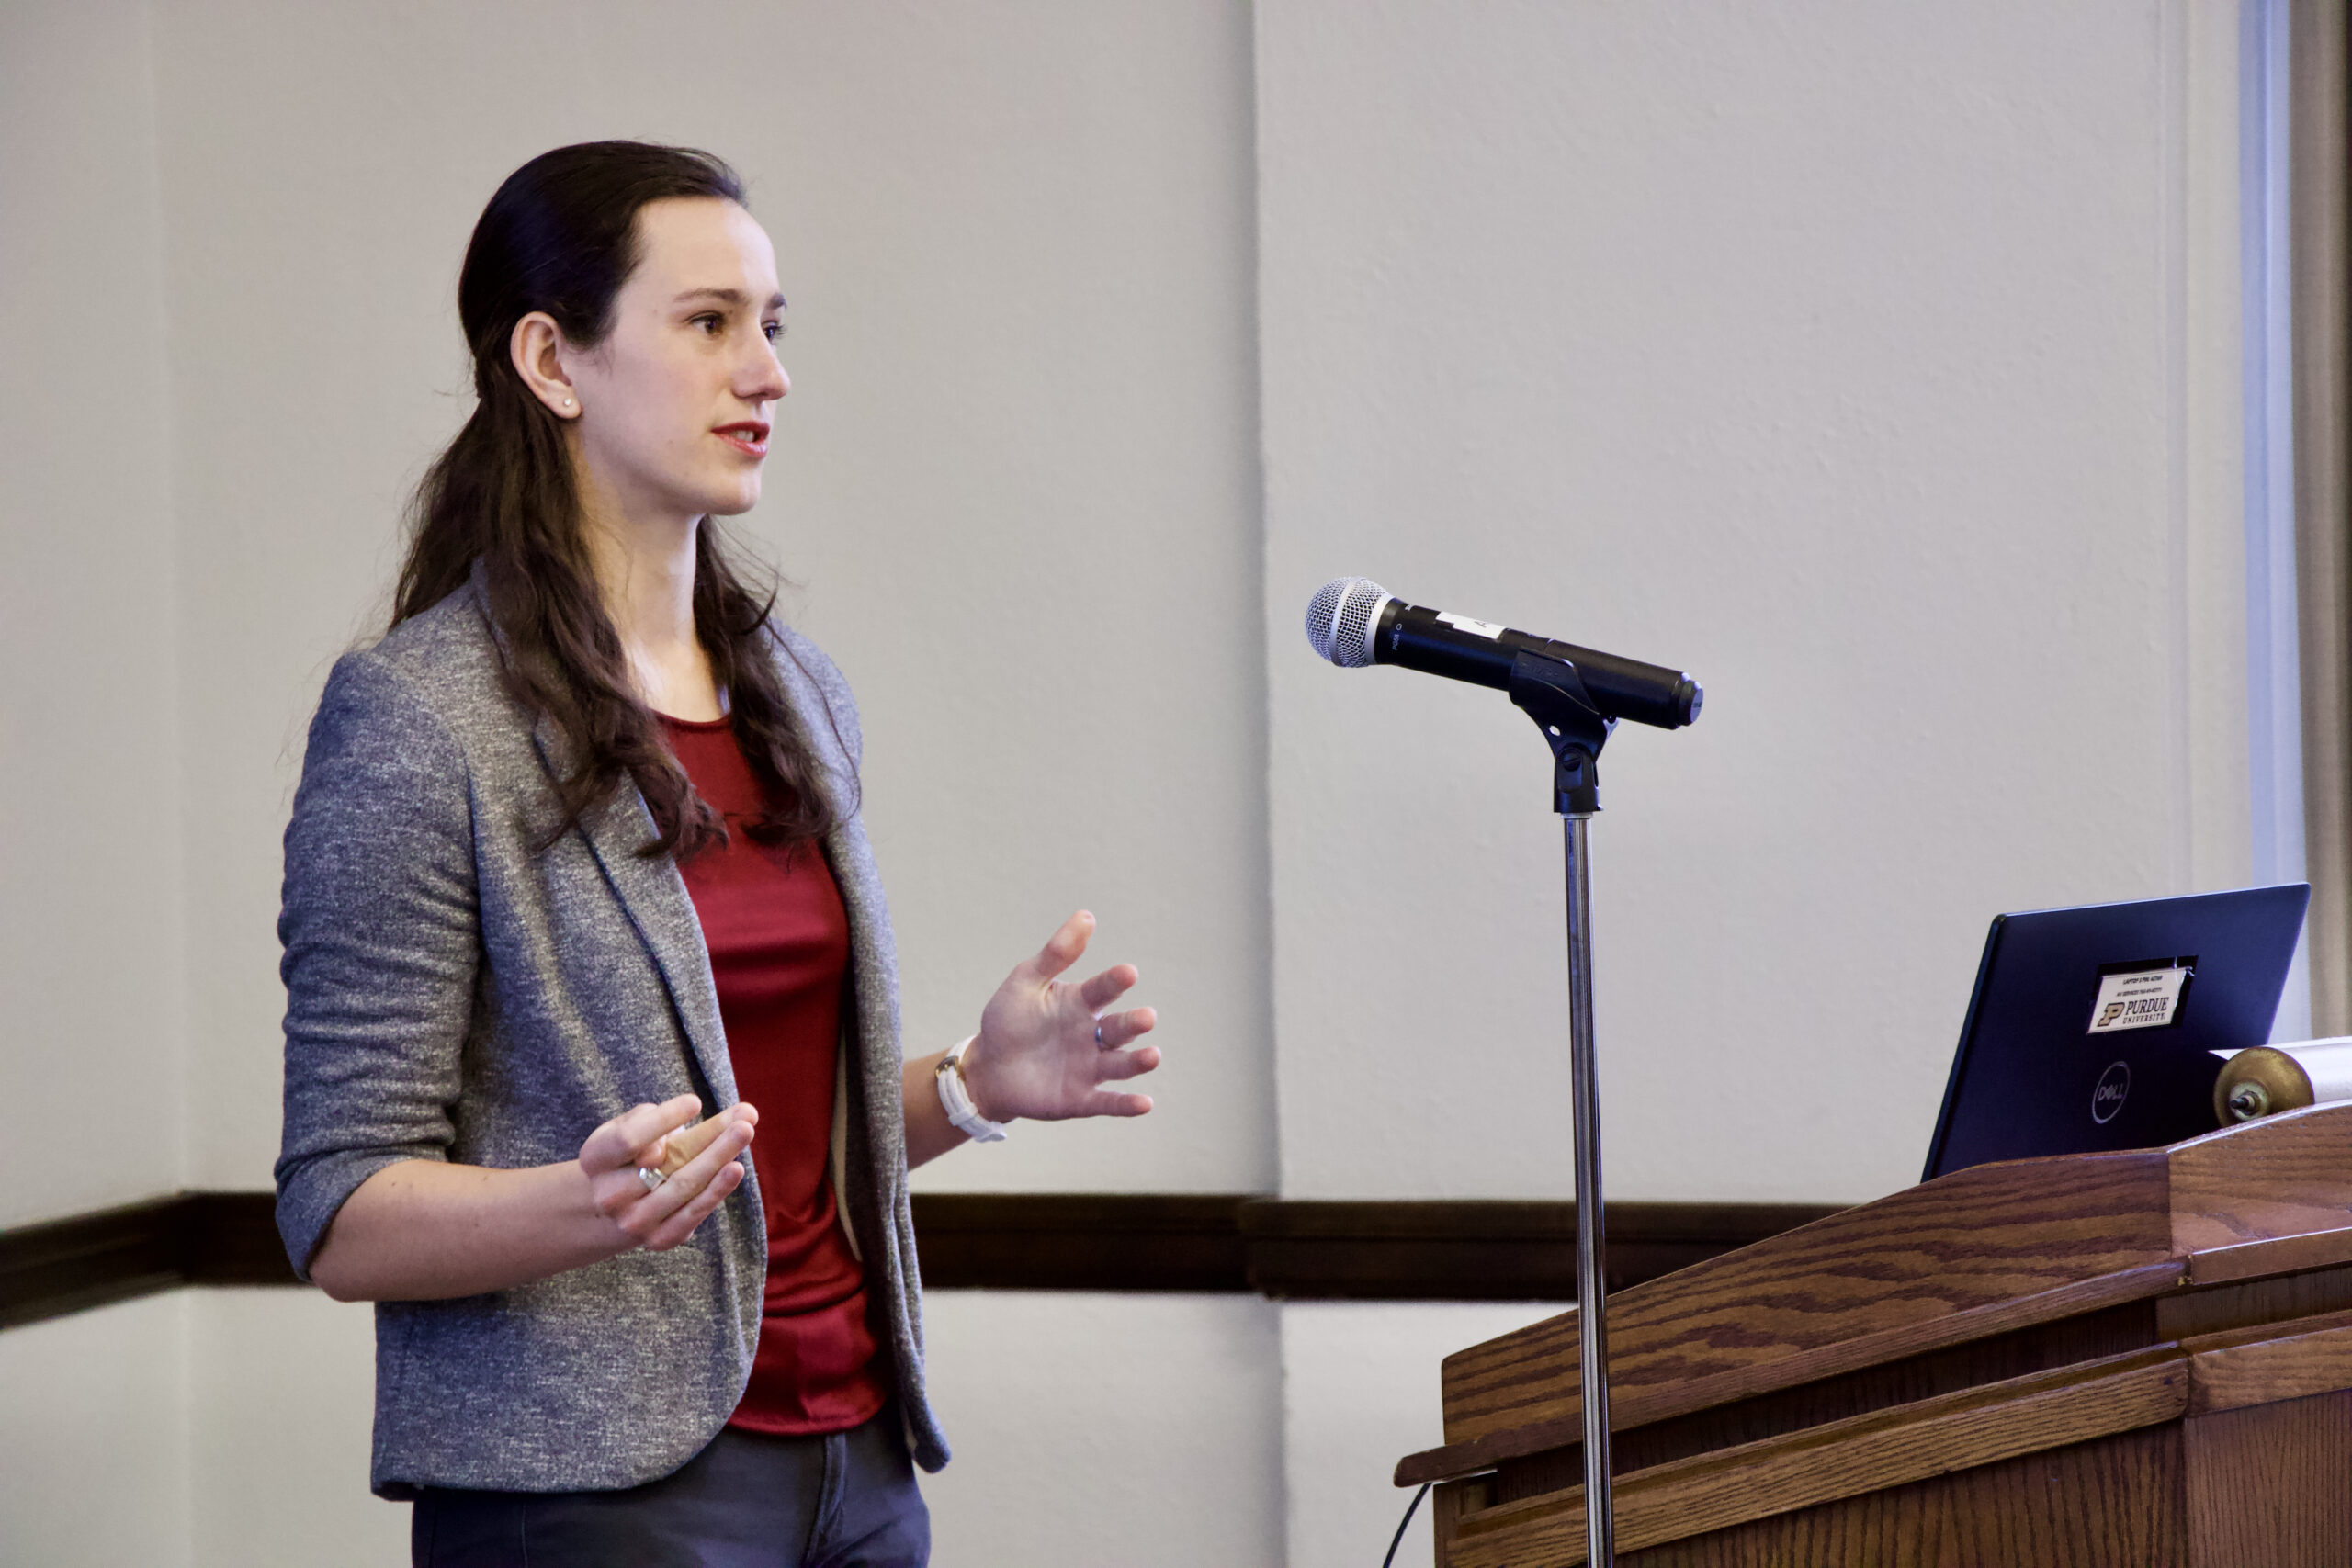 Emily Sandgren gives Three Minute Thesis presentation at a Purdue HHS event.